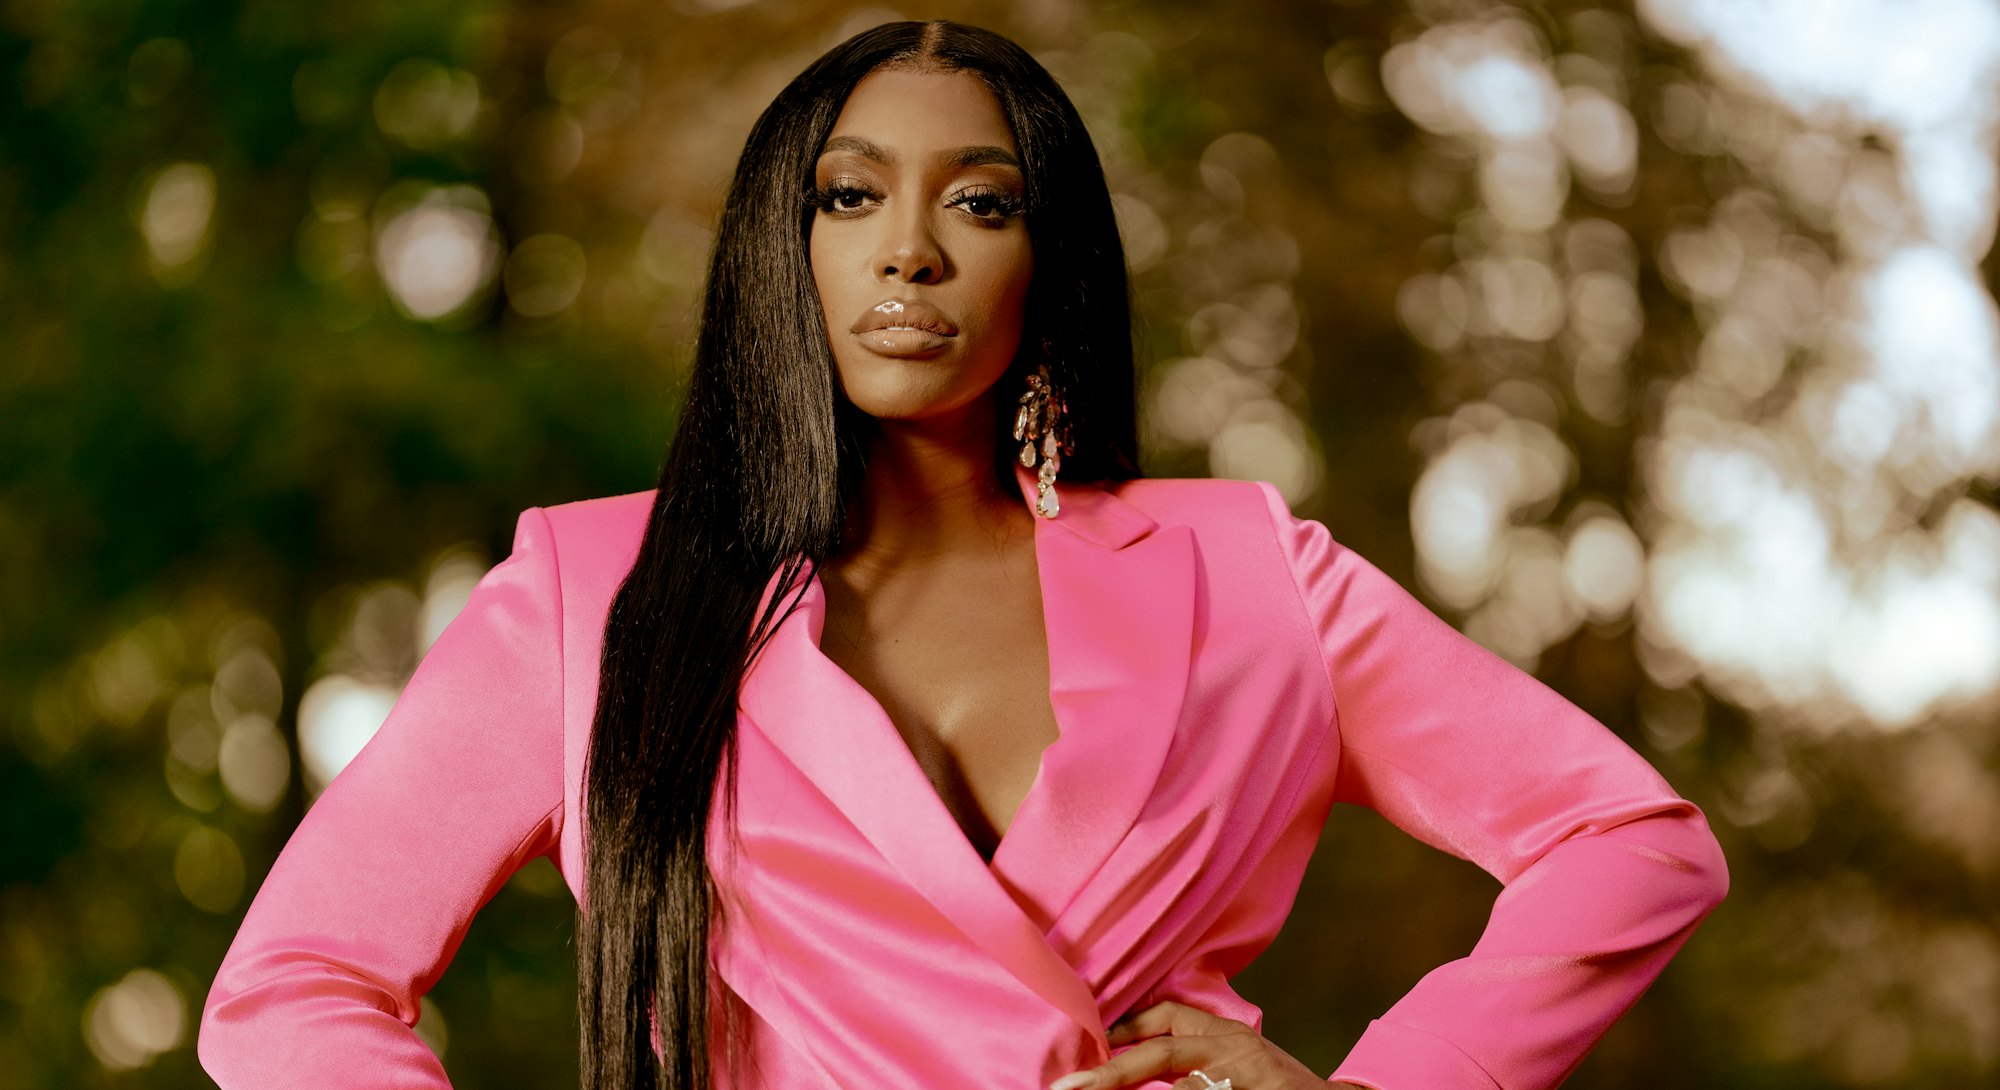 Porsha standing in a pink suit with her hands on her hips